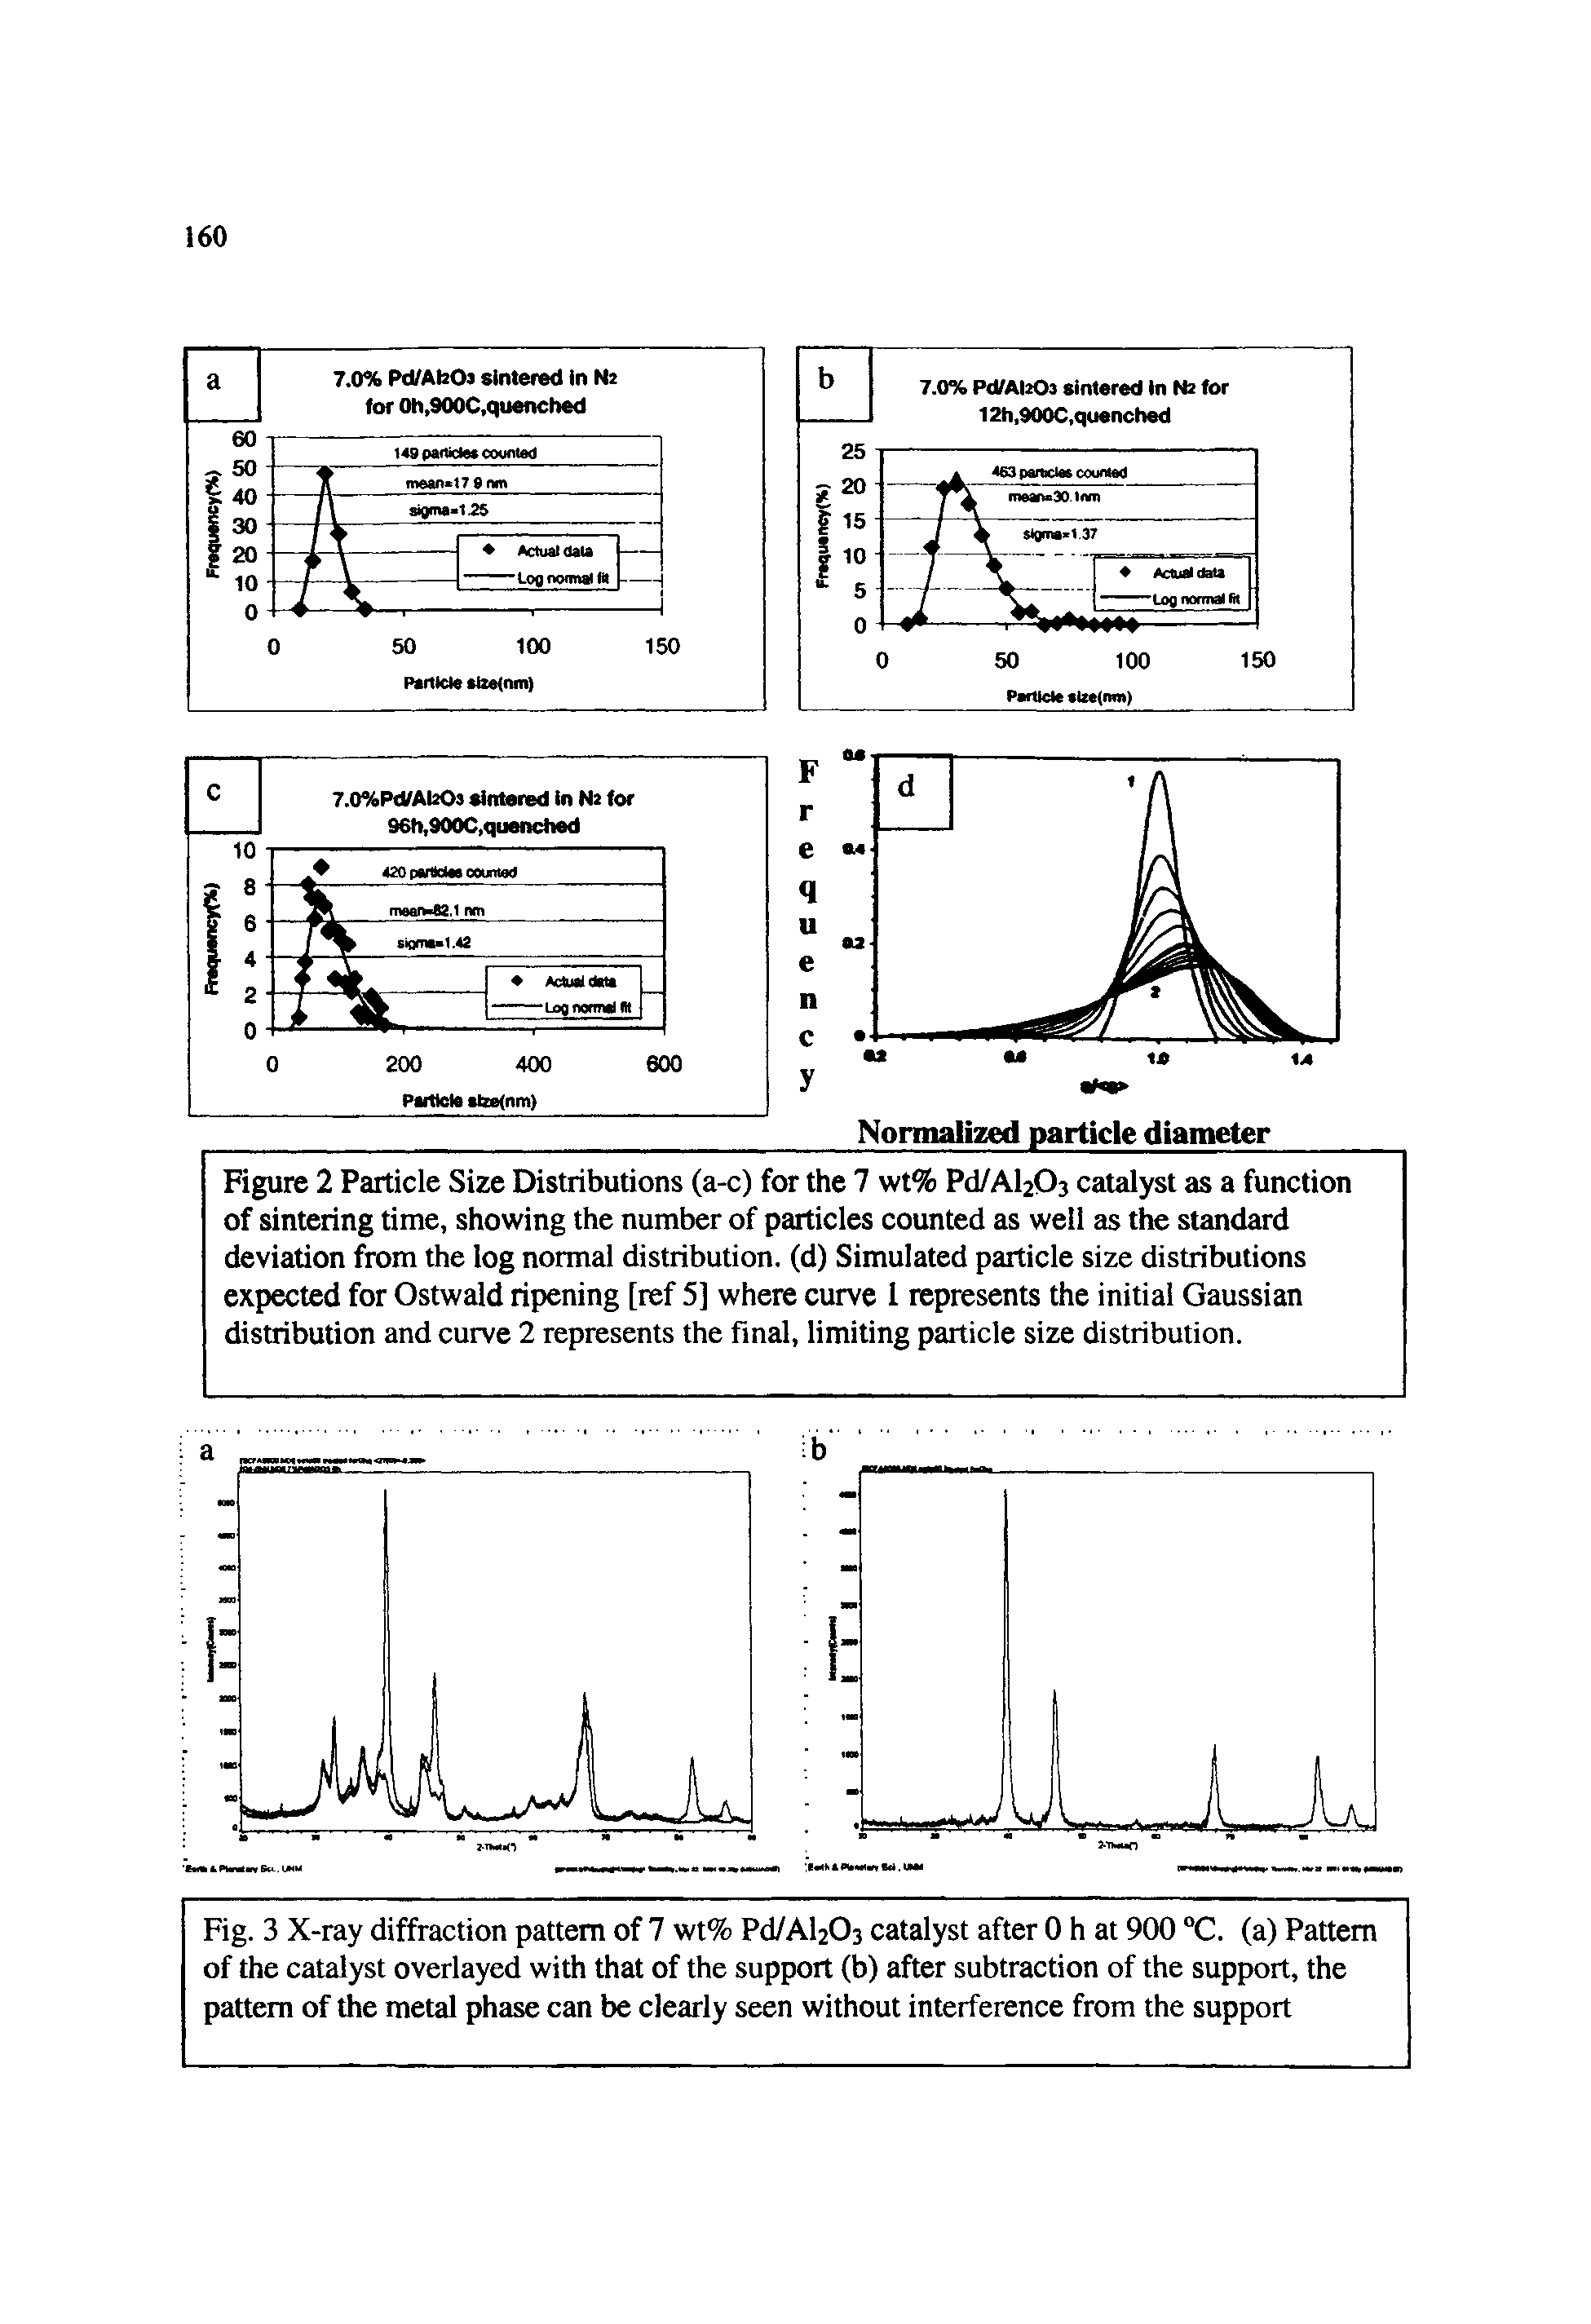 Figure 2 Particle Size Distributions (a-c) for the 7 wt% Pd/Al203 catalyst as a function of sintering time, showing the number of particles counted as well as the standard deviation from the log normal distribution, (d) Simulated particle size distributions expected for Ostwald ripening [ref 5] where curve 1 represents the initial Gaussian distribution and curve 2 represents the final, limiting particle size distribution.